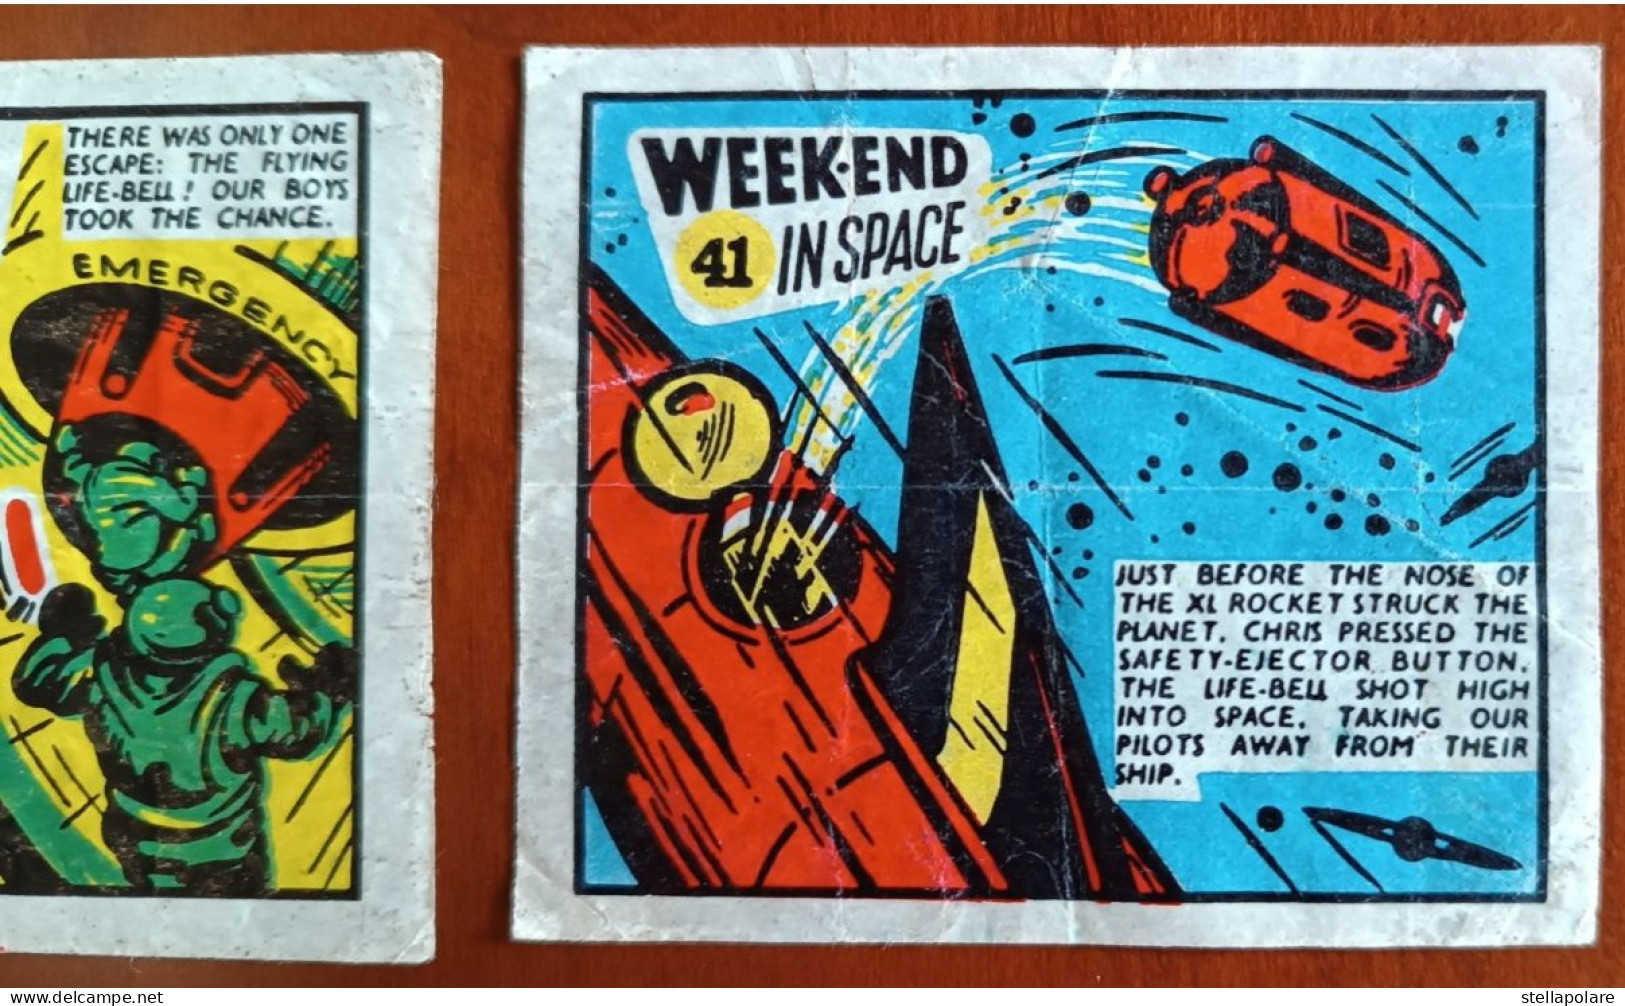 Space Encyclopaedia  Week-end in Space 24/48 wax wrappers  Anglo American Bell Boy bubble gum about 1960